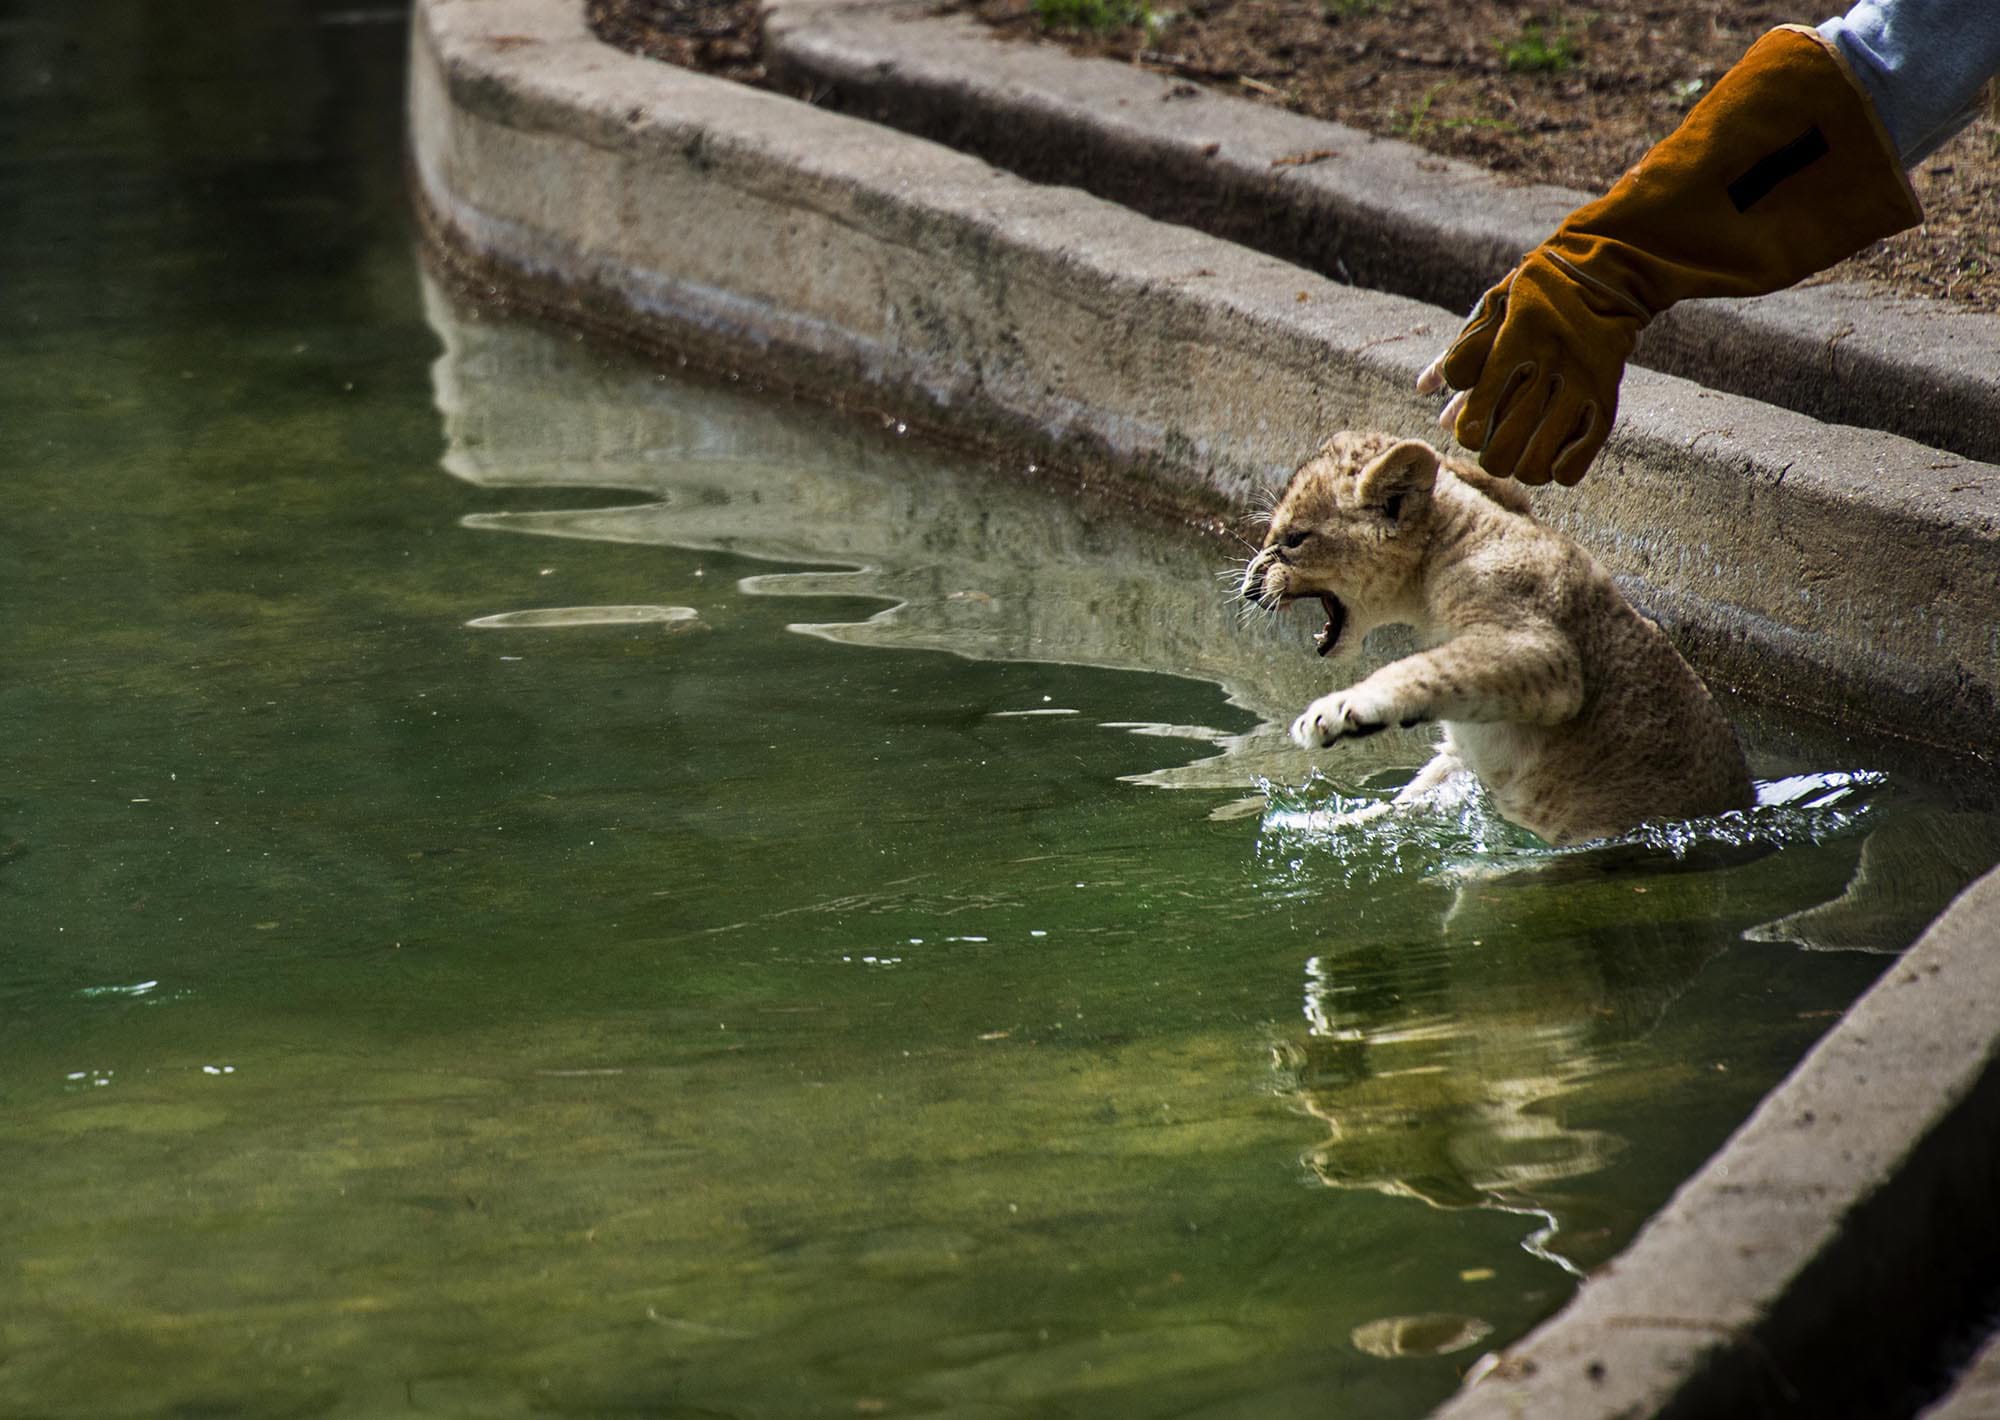 Melina Mara/Washington Post
Biologist Leigh Pitsko drops the first, a male, of four African lion cubs into the water for their first swim under the watchful care of National Zoo staff in Washington.